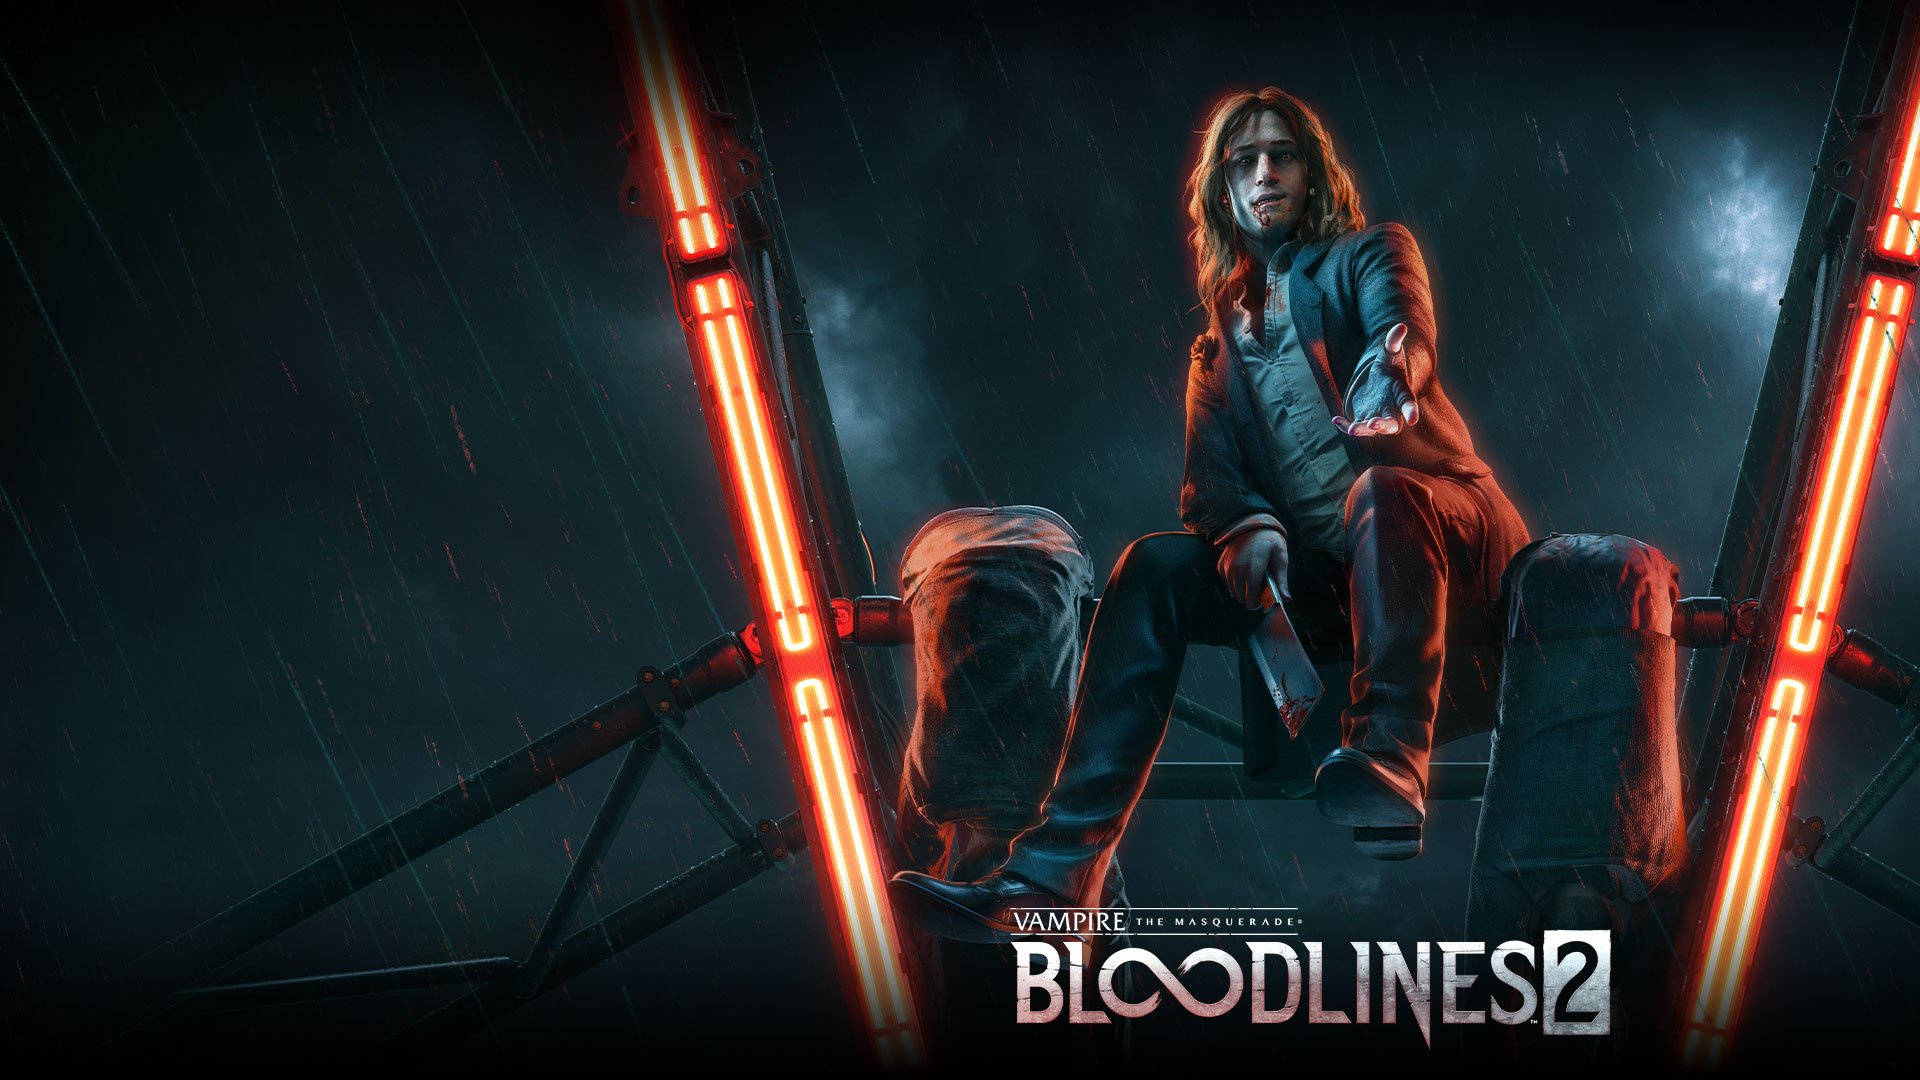 Vampires: The Masquerade - Bloodlines 2 coming March 2020. Pre-order today!  - News - Gamesplanet.com